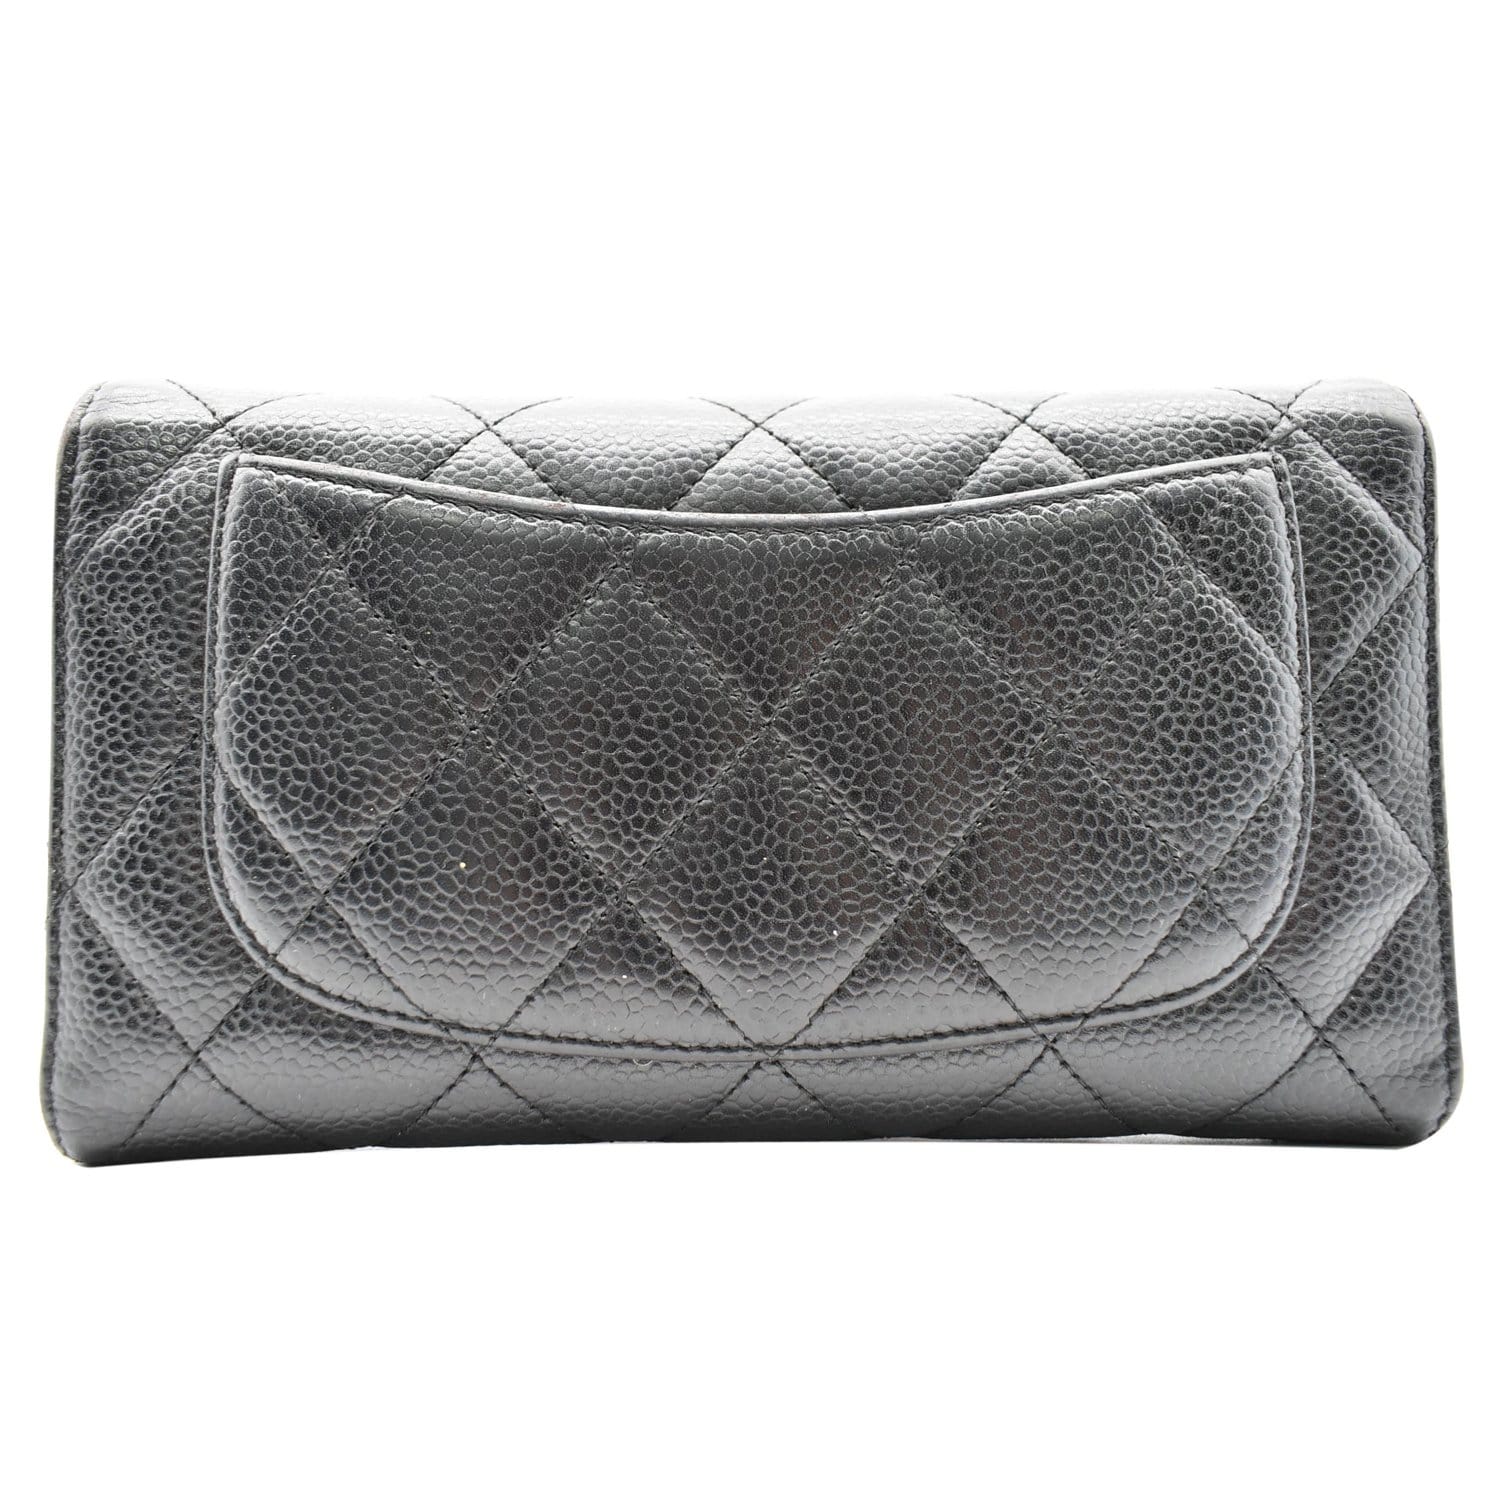 CHANEL Classic Flap Caviar Leather Card Holder Wallet Black - 10% OFF